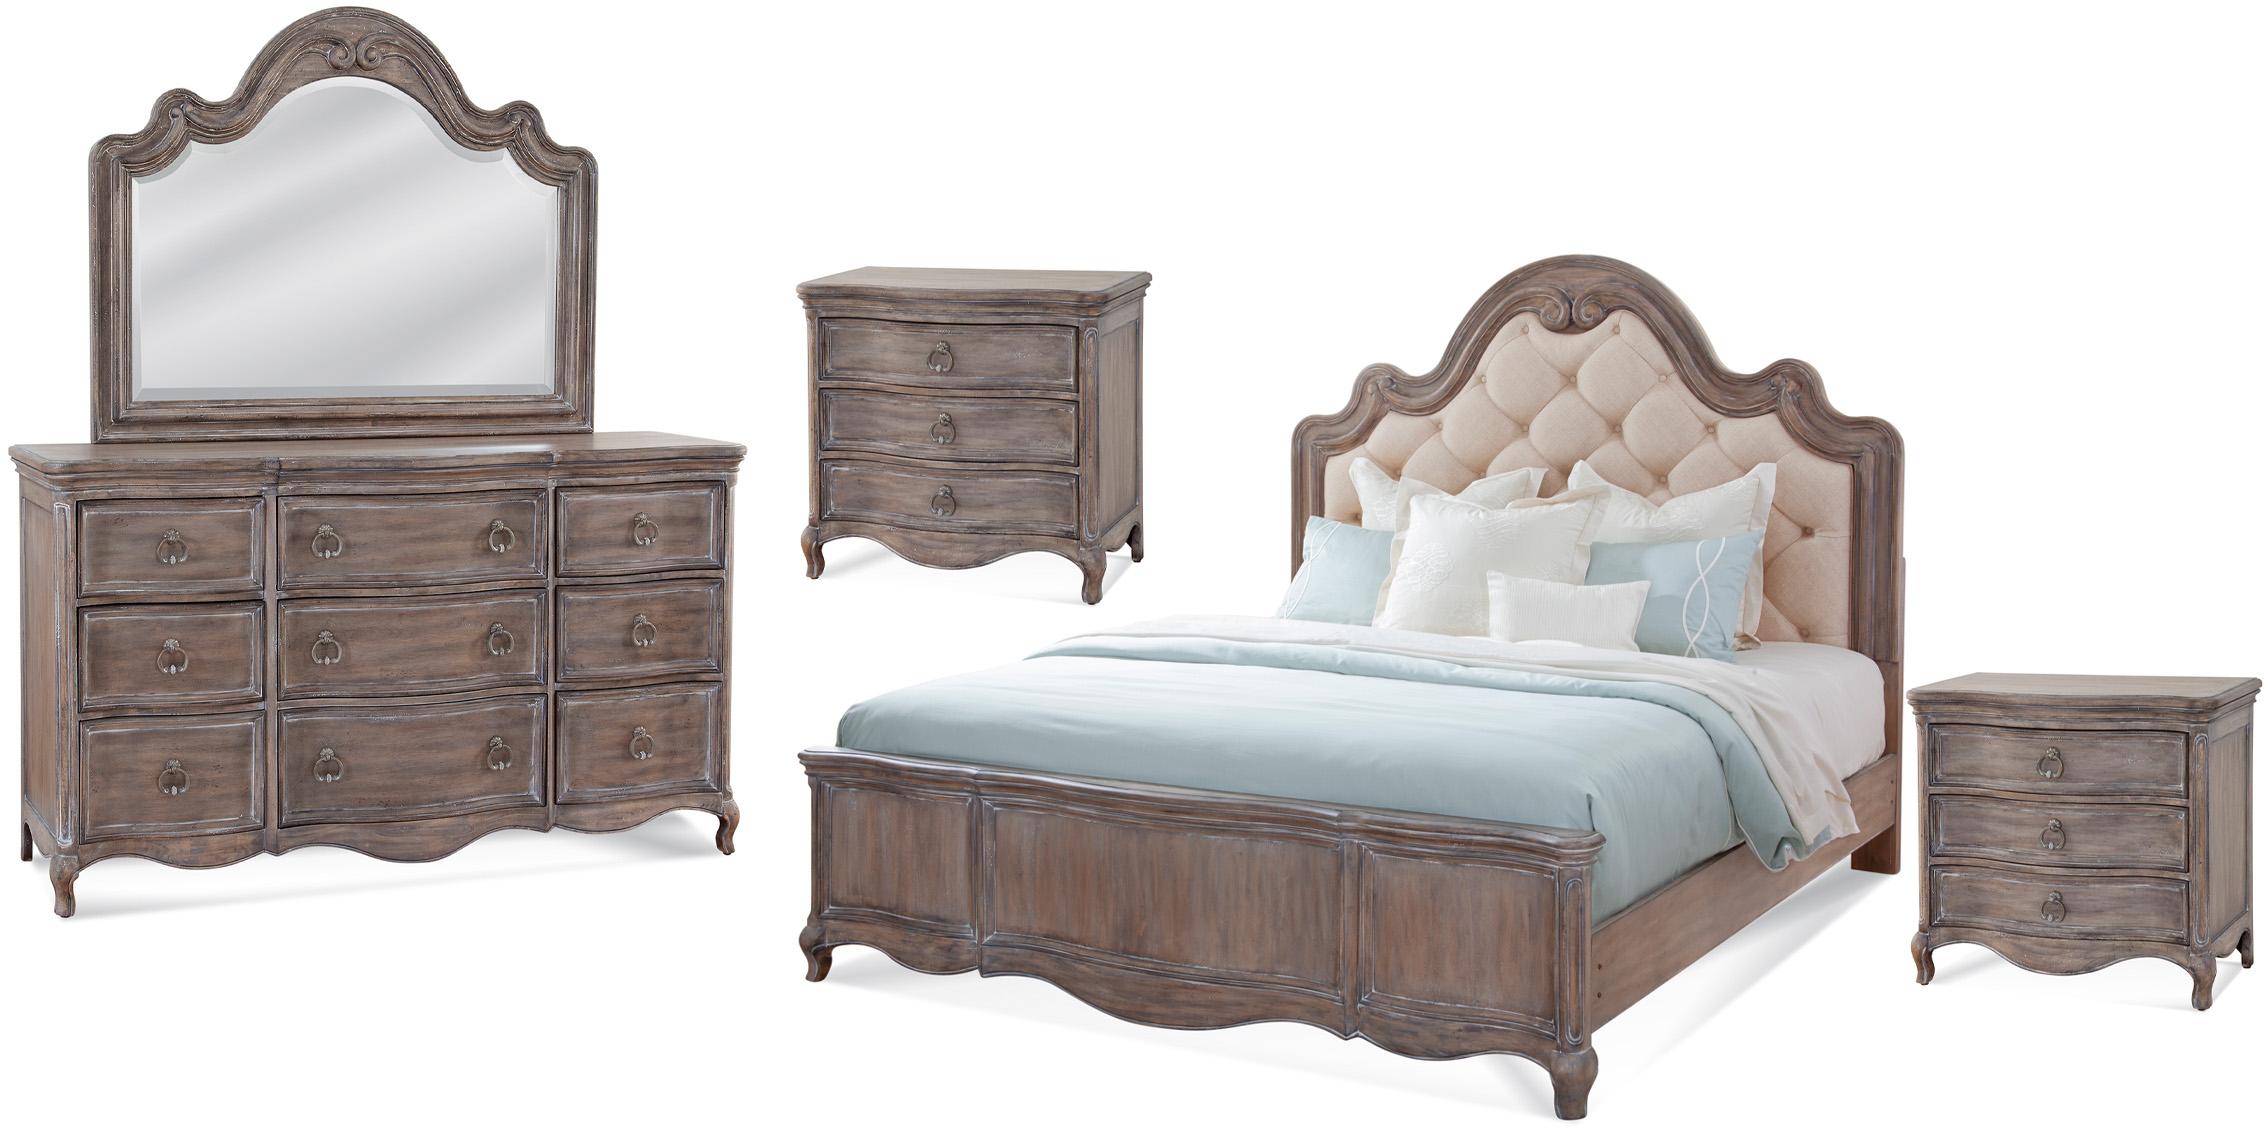 Classic, Traditional Panel Bedroom Set GENOA 1575-66TUPH-Set 1575-66TUPH-2NDM-5PC in Antique, Gray Fabric